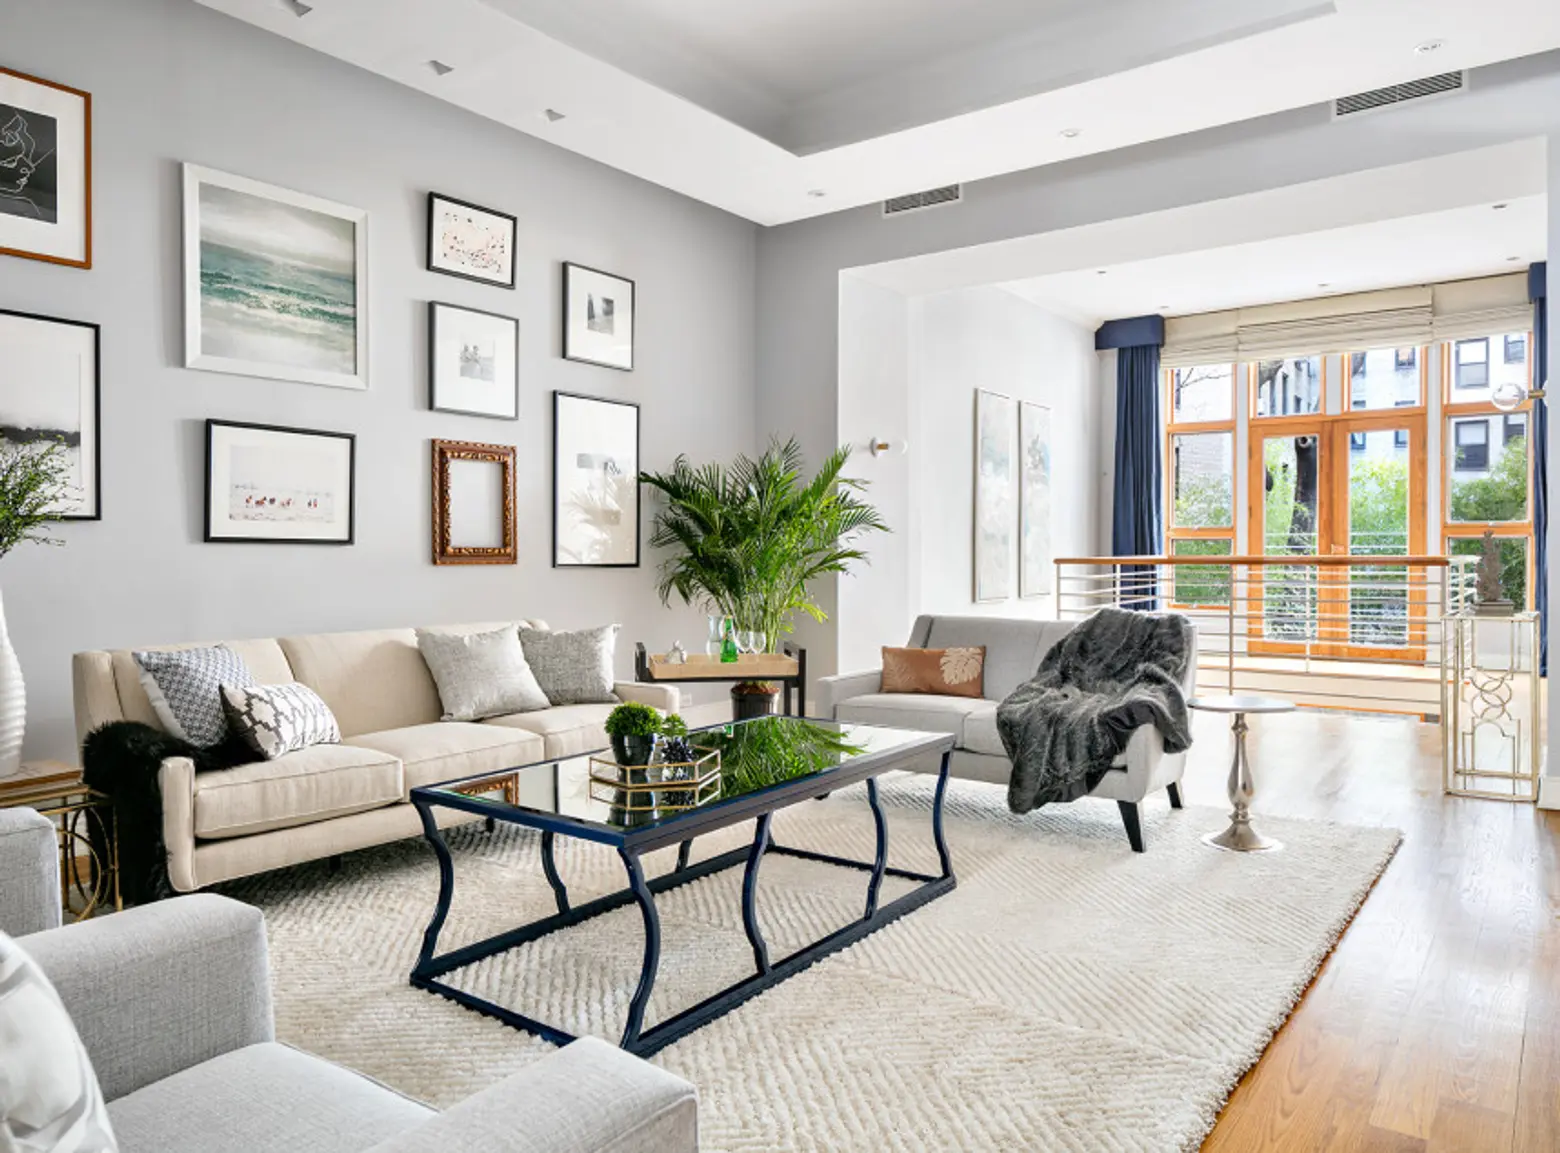 Recently Sold for $10M in Bidding War, Furnished UES Townhouse Now Renting for $50K/Month